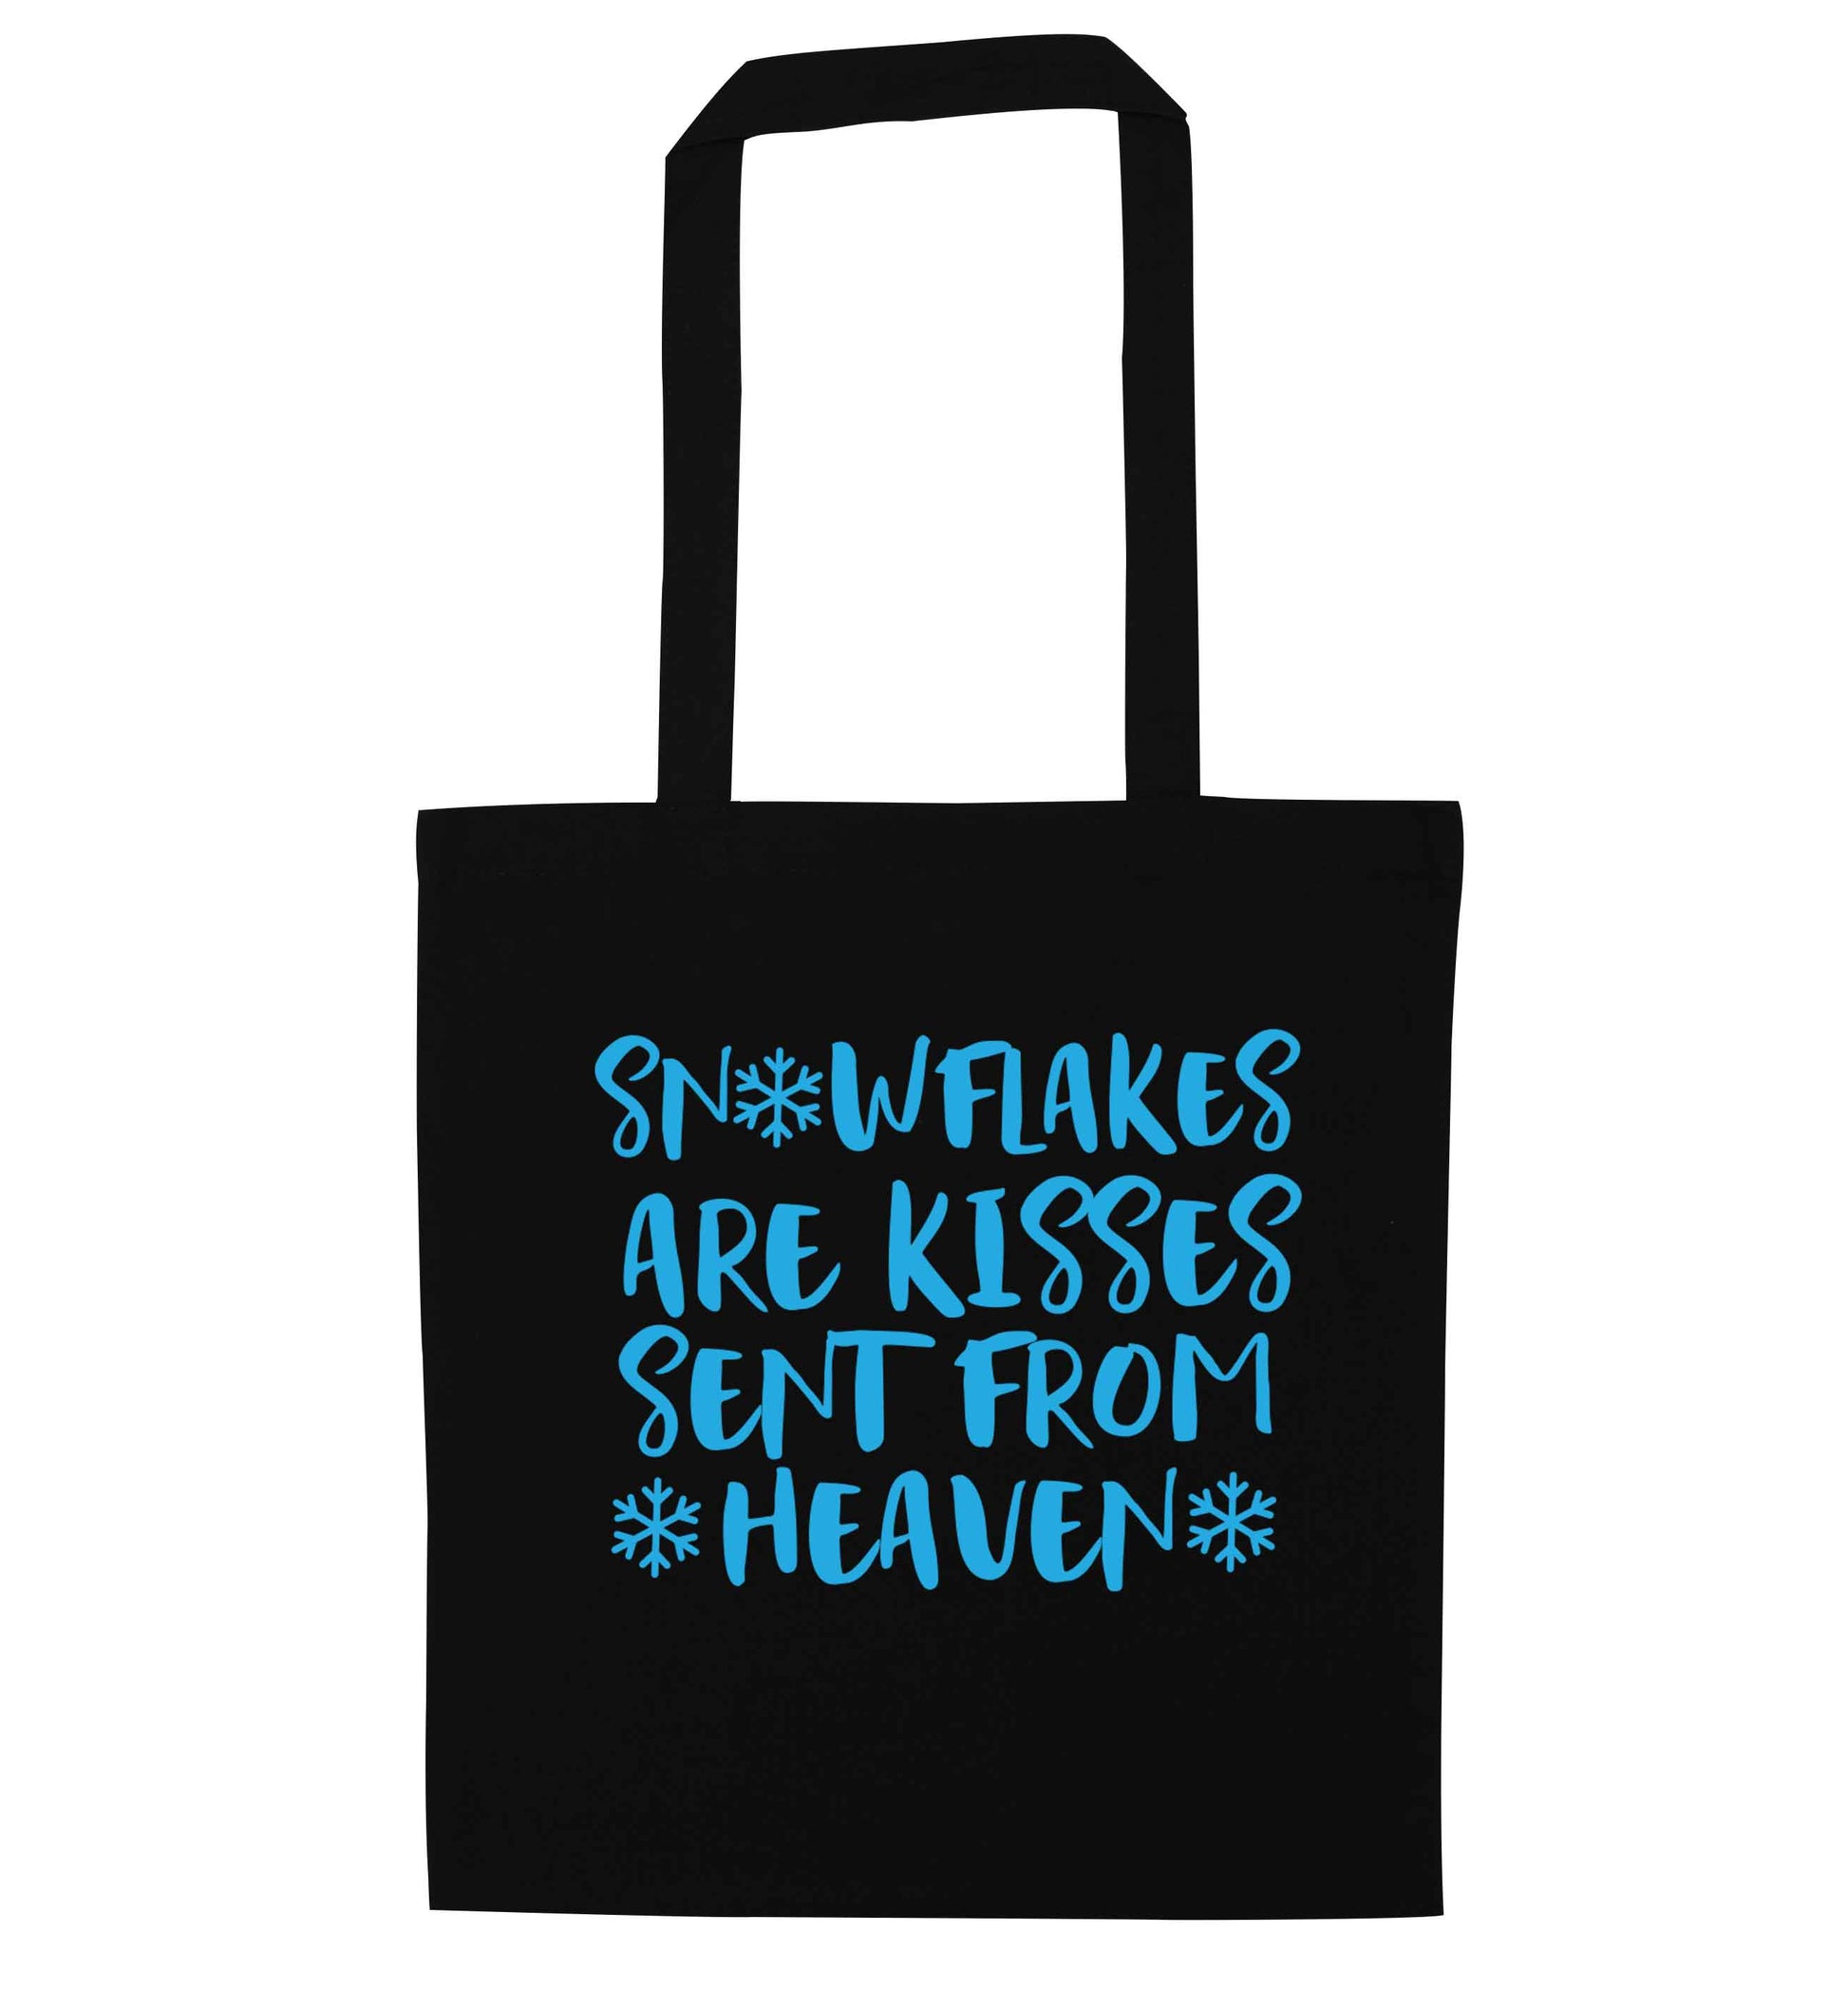 Snowflakes are kisses sent from heaven black tote bag